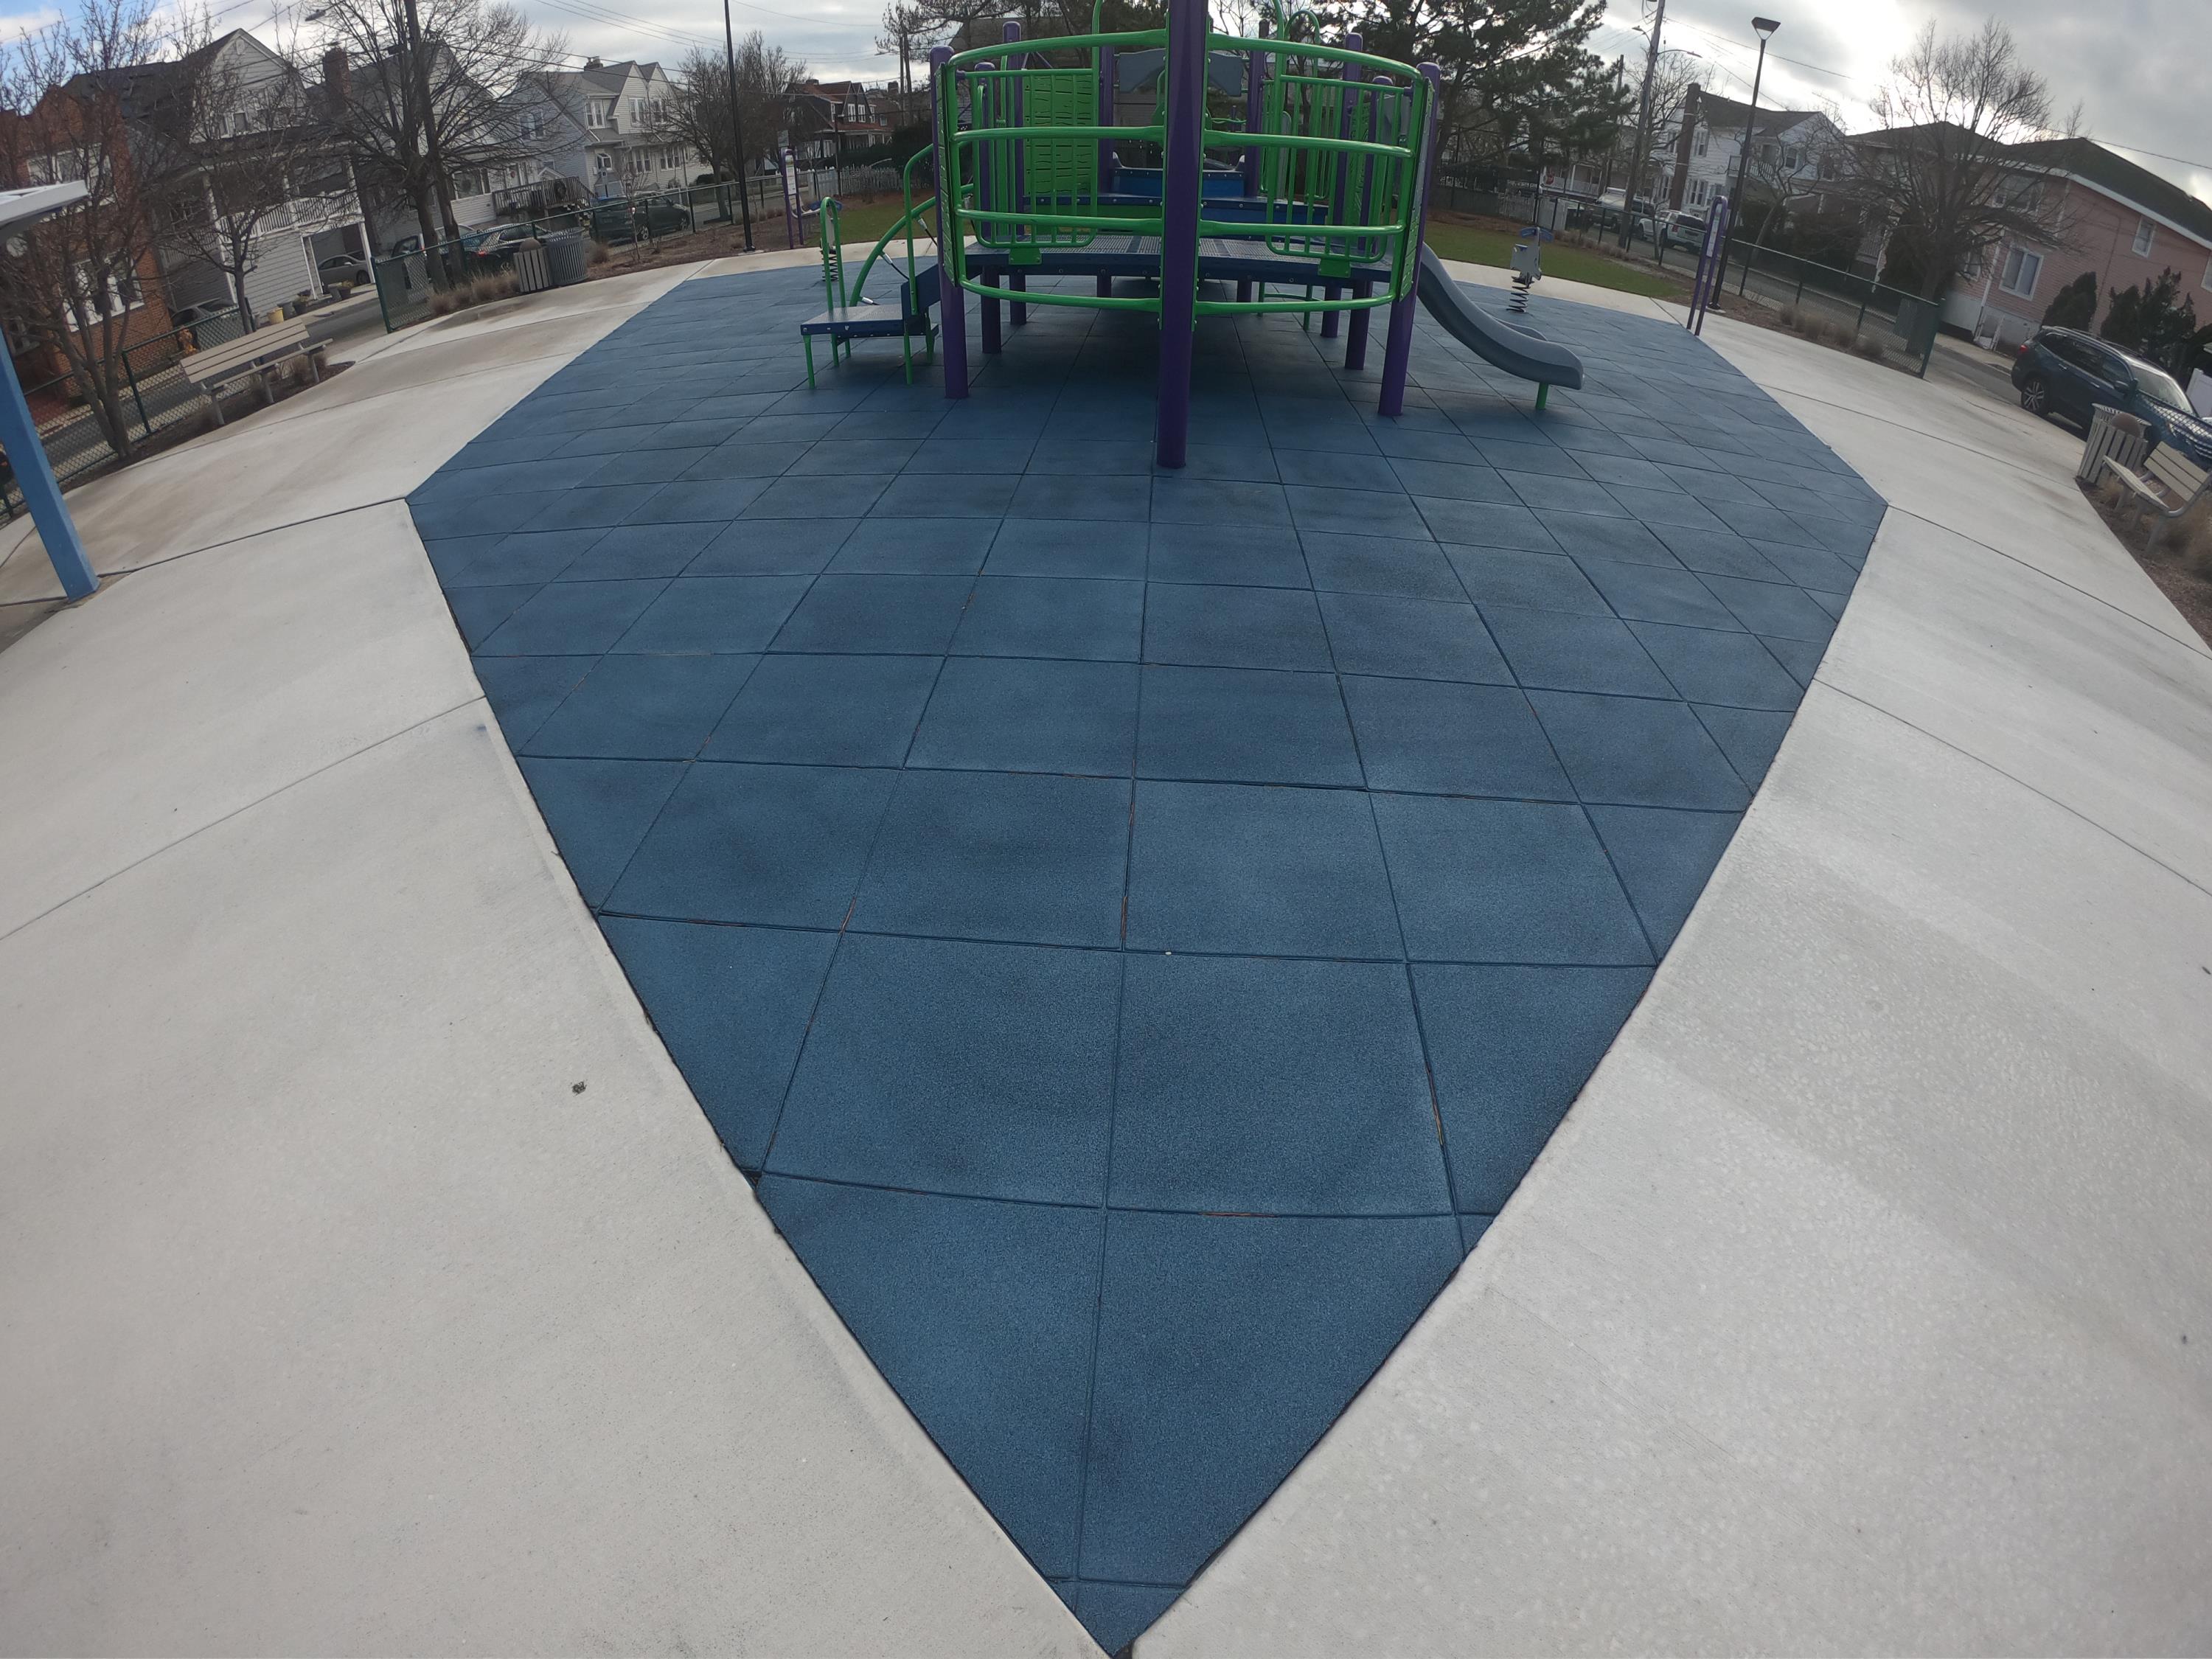 2.5" thick Play-Land series with custom made blue pigmented play tiles